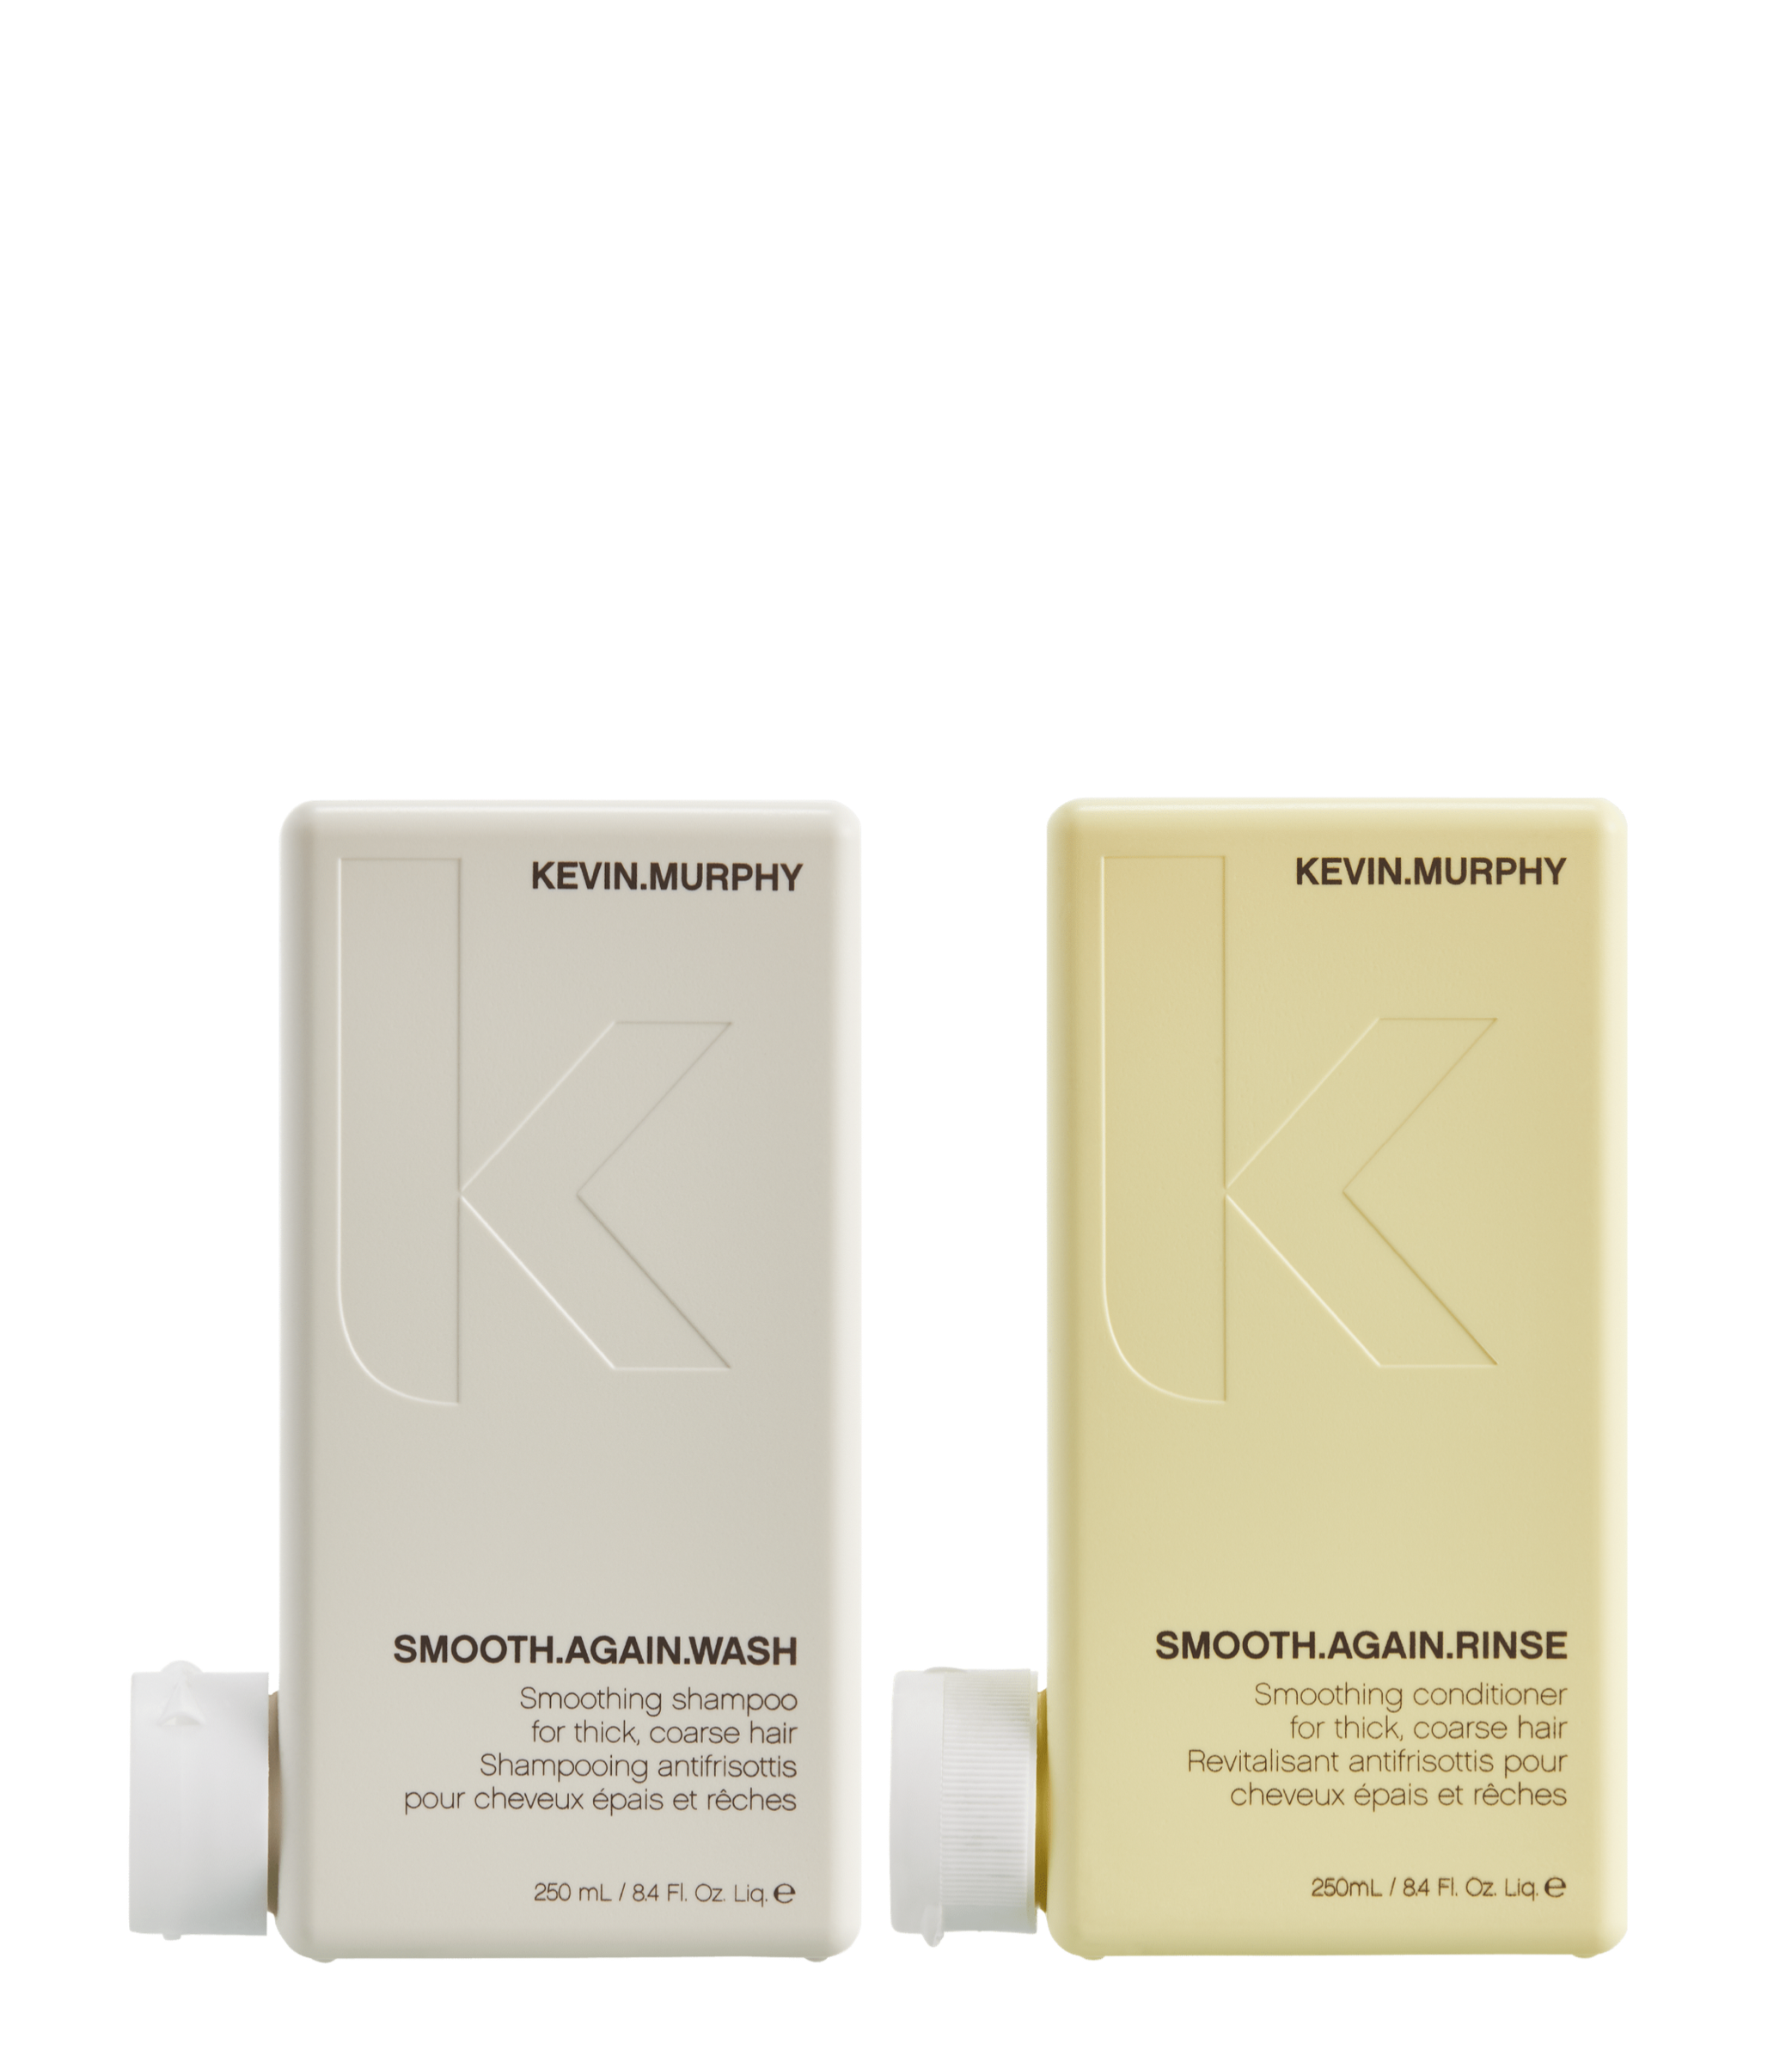 GAMME SMOOTH AGAIN KEVIN MURPHY